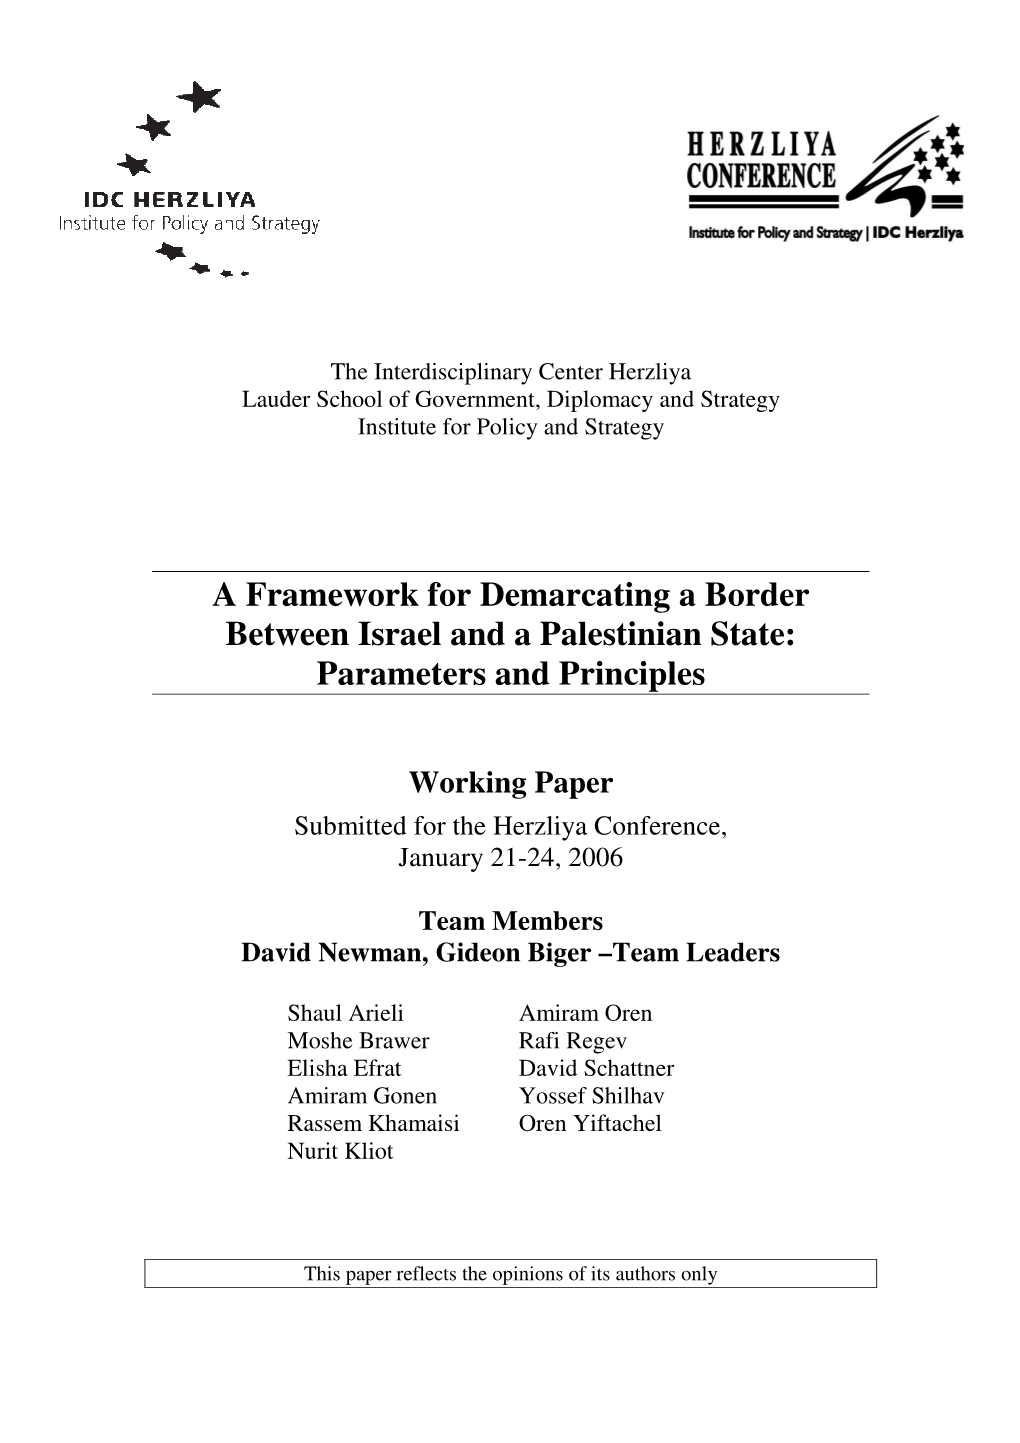 A Framework for Demarcating a Border Between Israel and a Palestinian State: Parameters and Principles